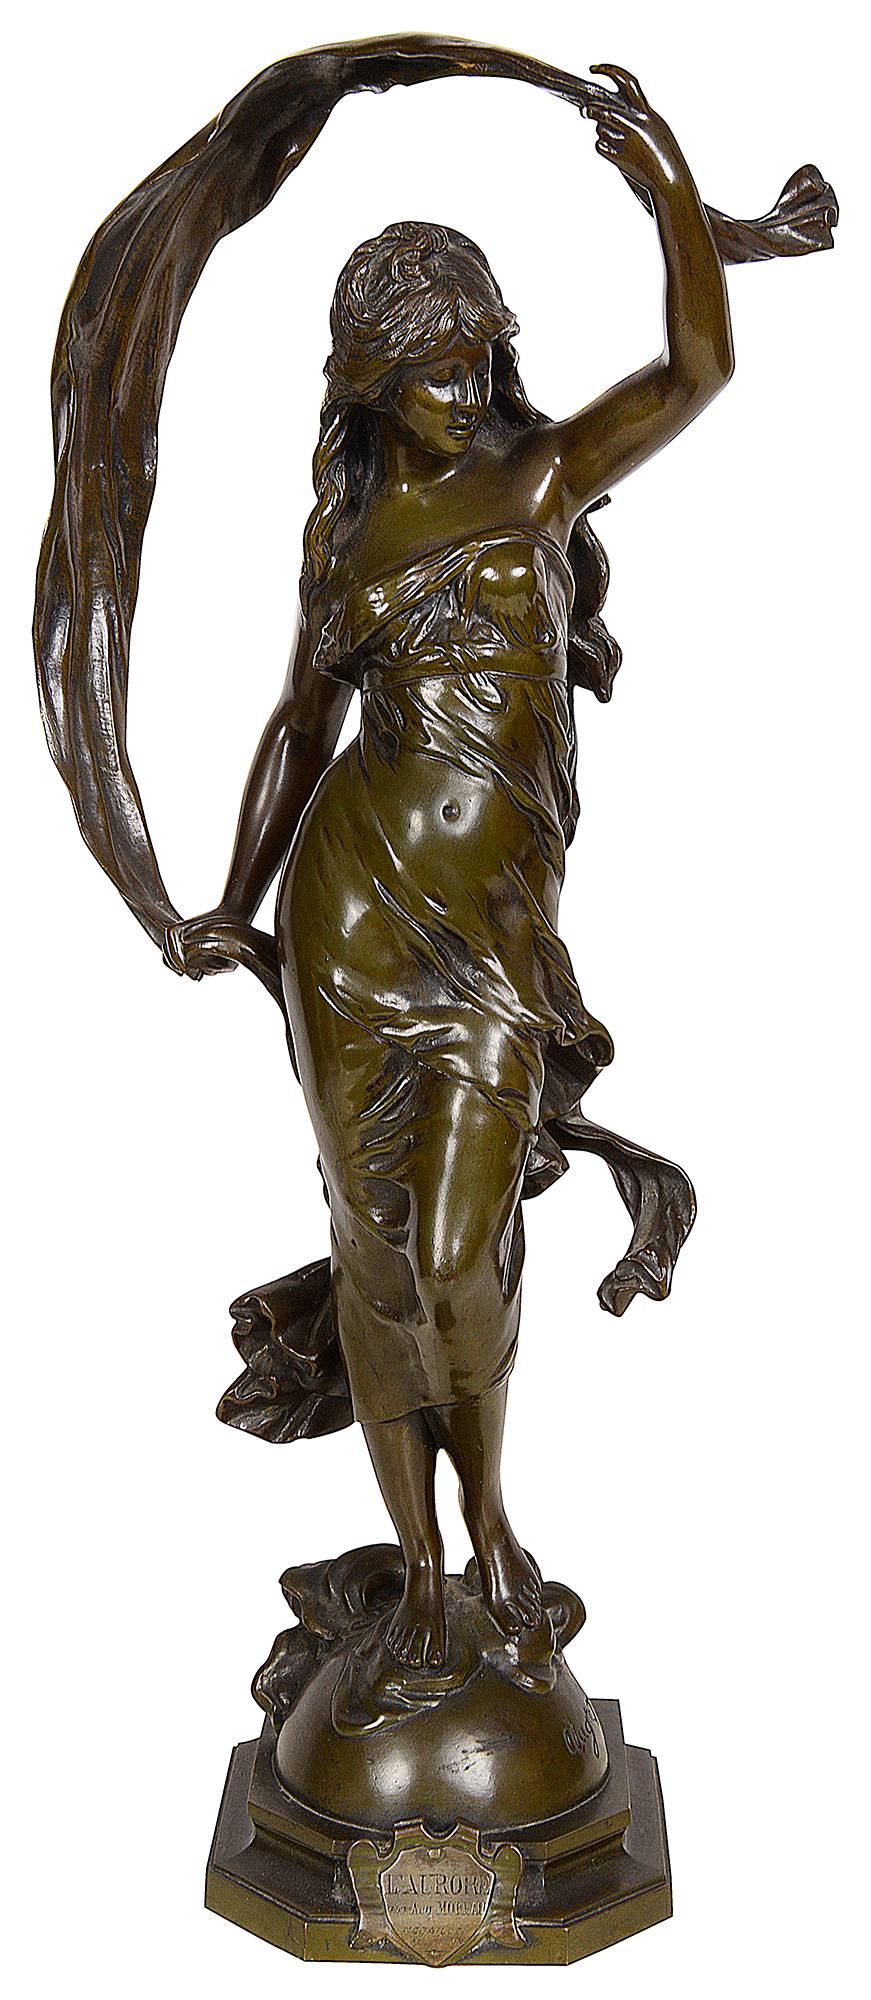 A very good quality 19th century patinated bronze statue of 'Aurore', signed Aug. Moreau

Aurora, in Greco-Roman mythology, the personification of the dawn. According to the Greek poet Hesiod's Theogony, she was the daughter of the Titan Hyperion